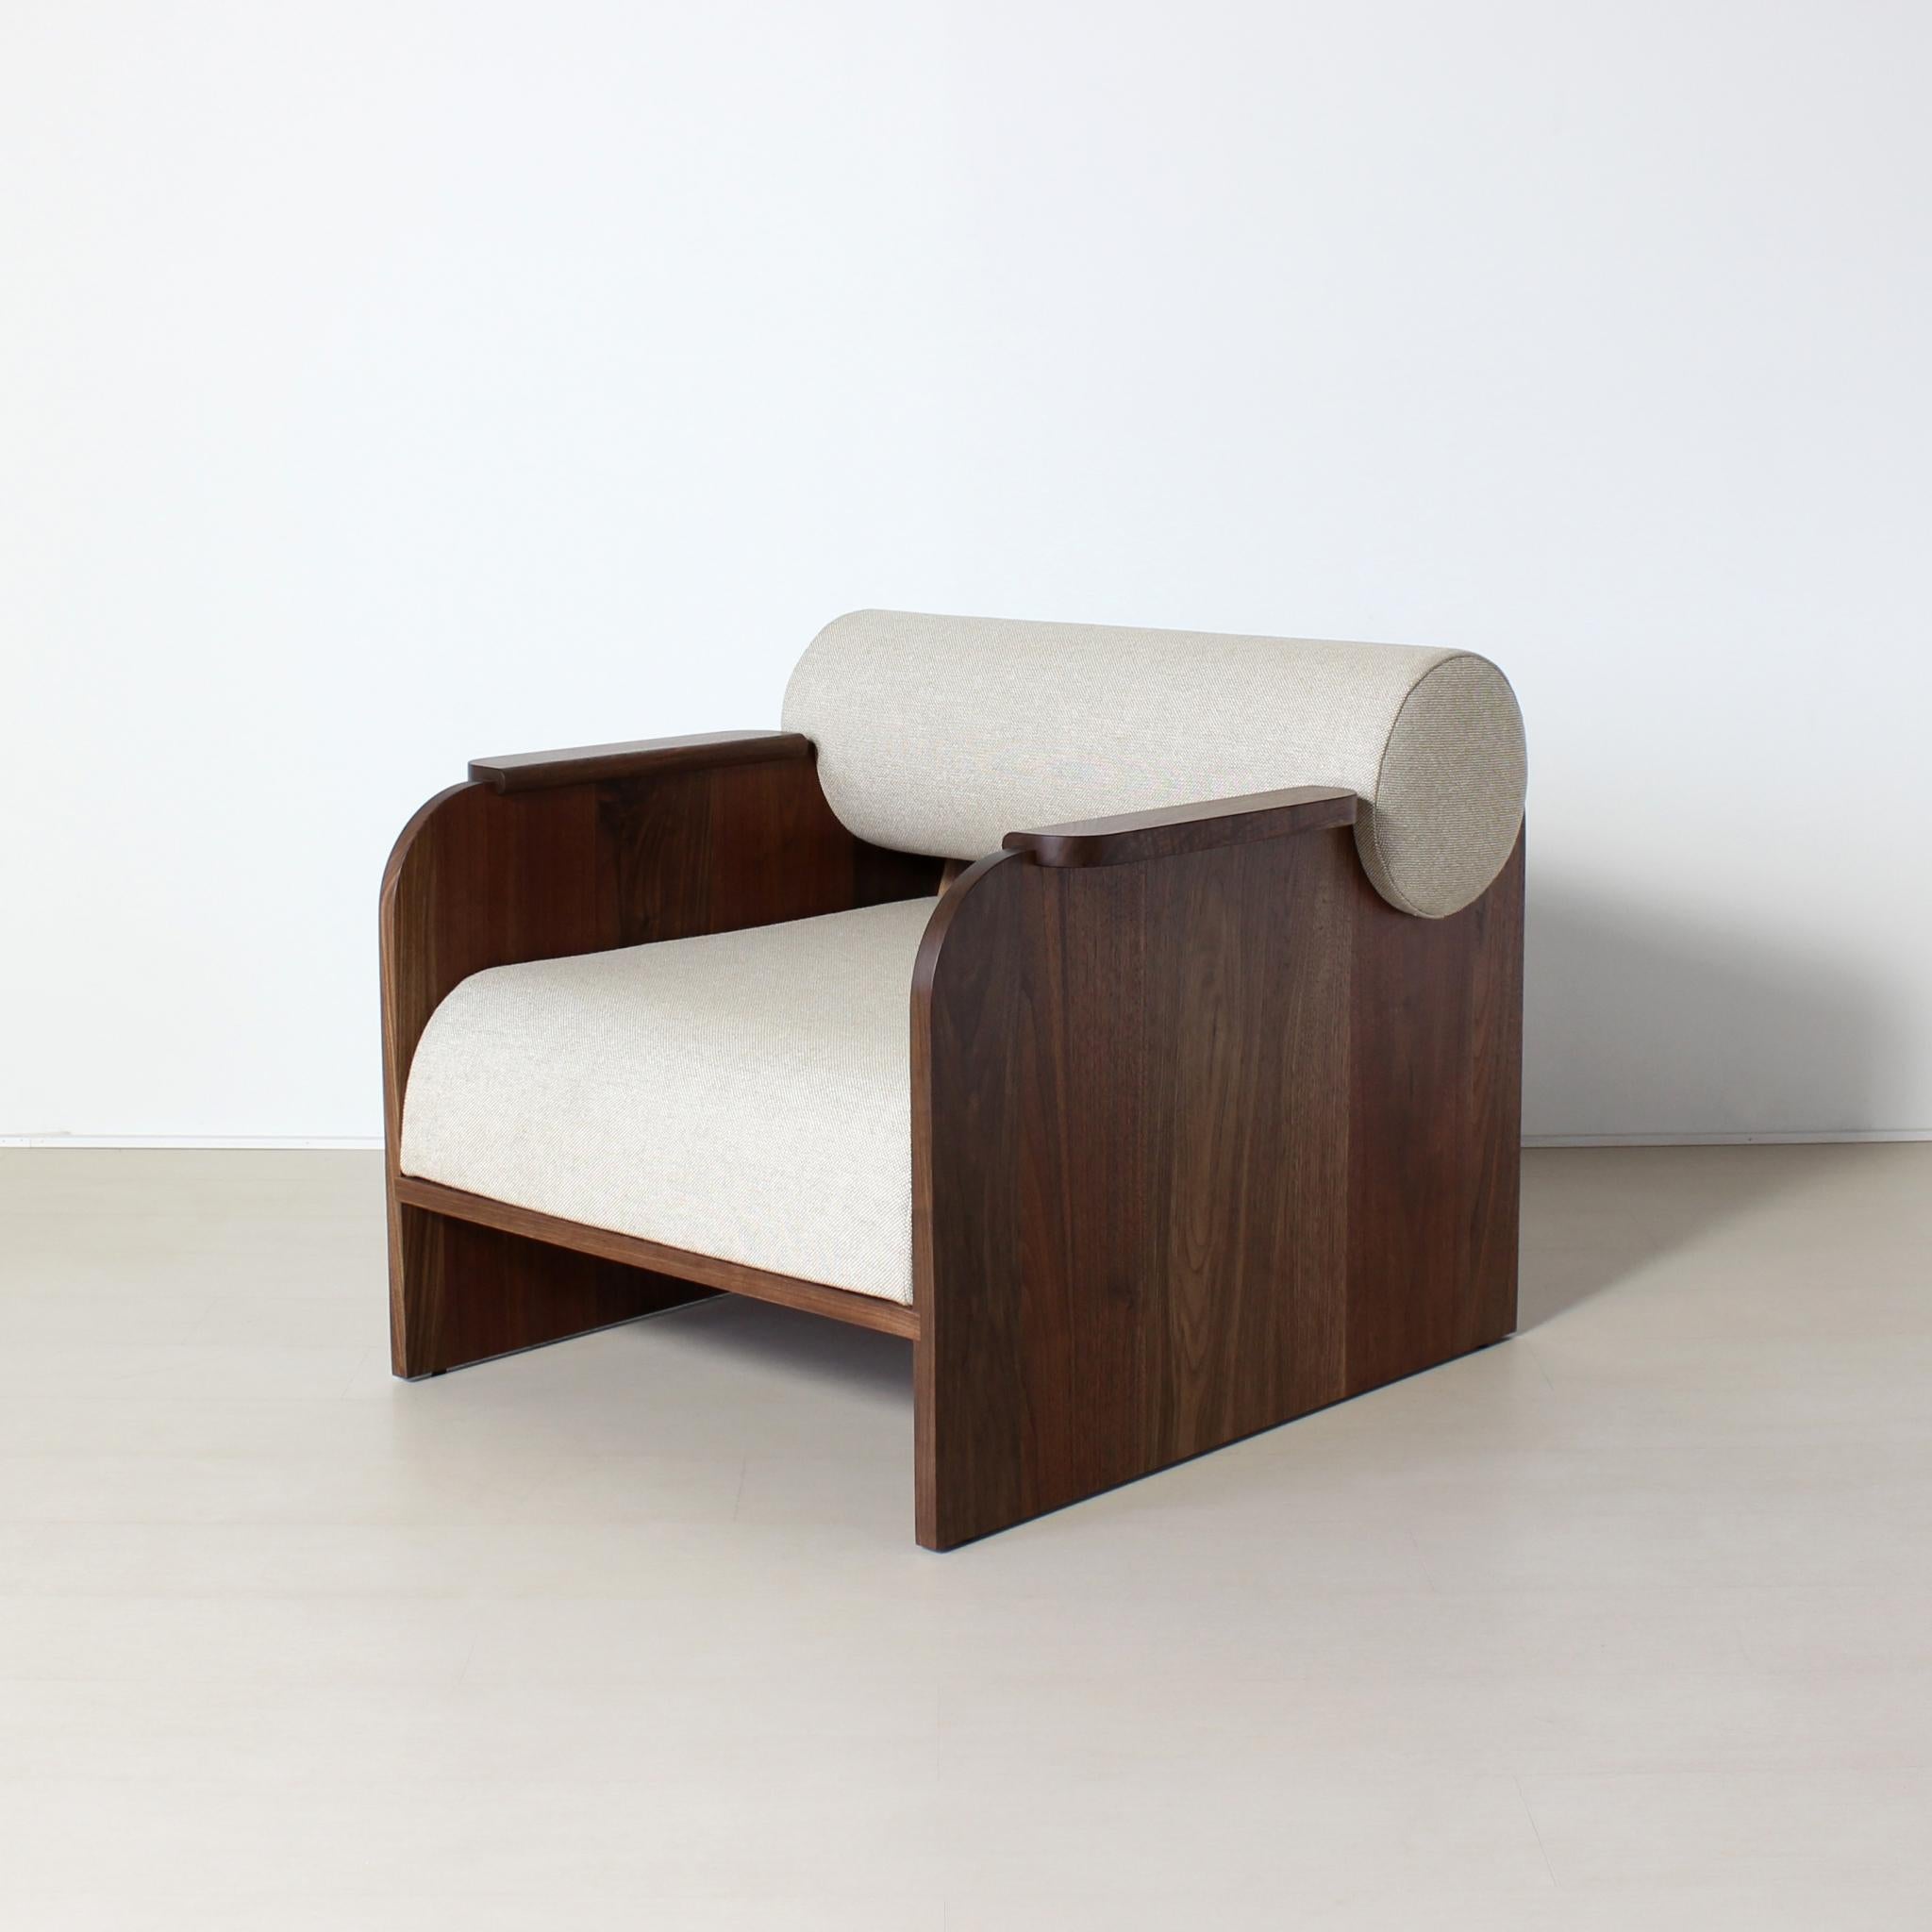 The June lounge chair by Crump and Kwash, is built using sustainably sourced solid wood, and premium foam cushioning. The upholstery can be selected from our material inventory or supplied by the client. 

Dimension (cm): 76 x 89 x 74 (H). Seat H